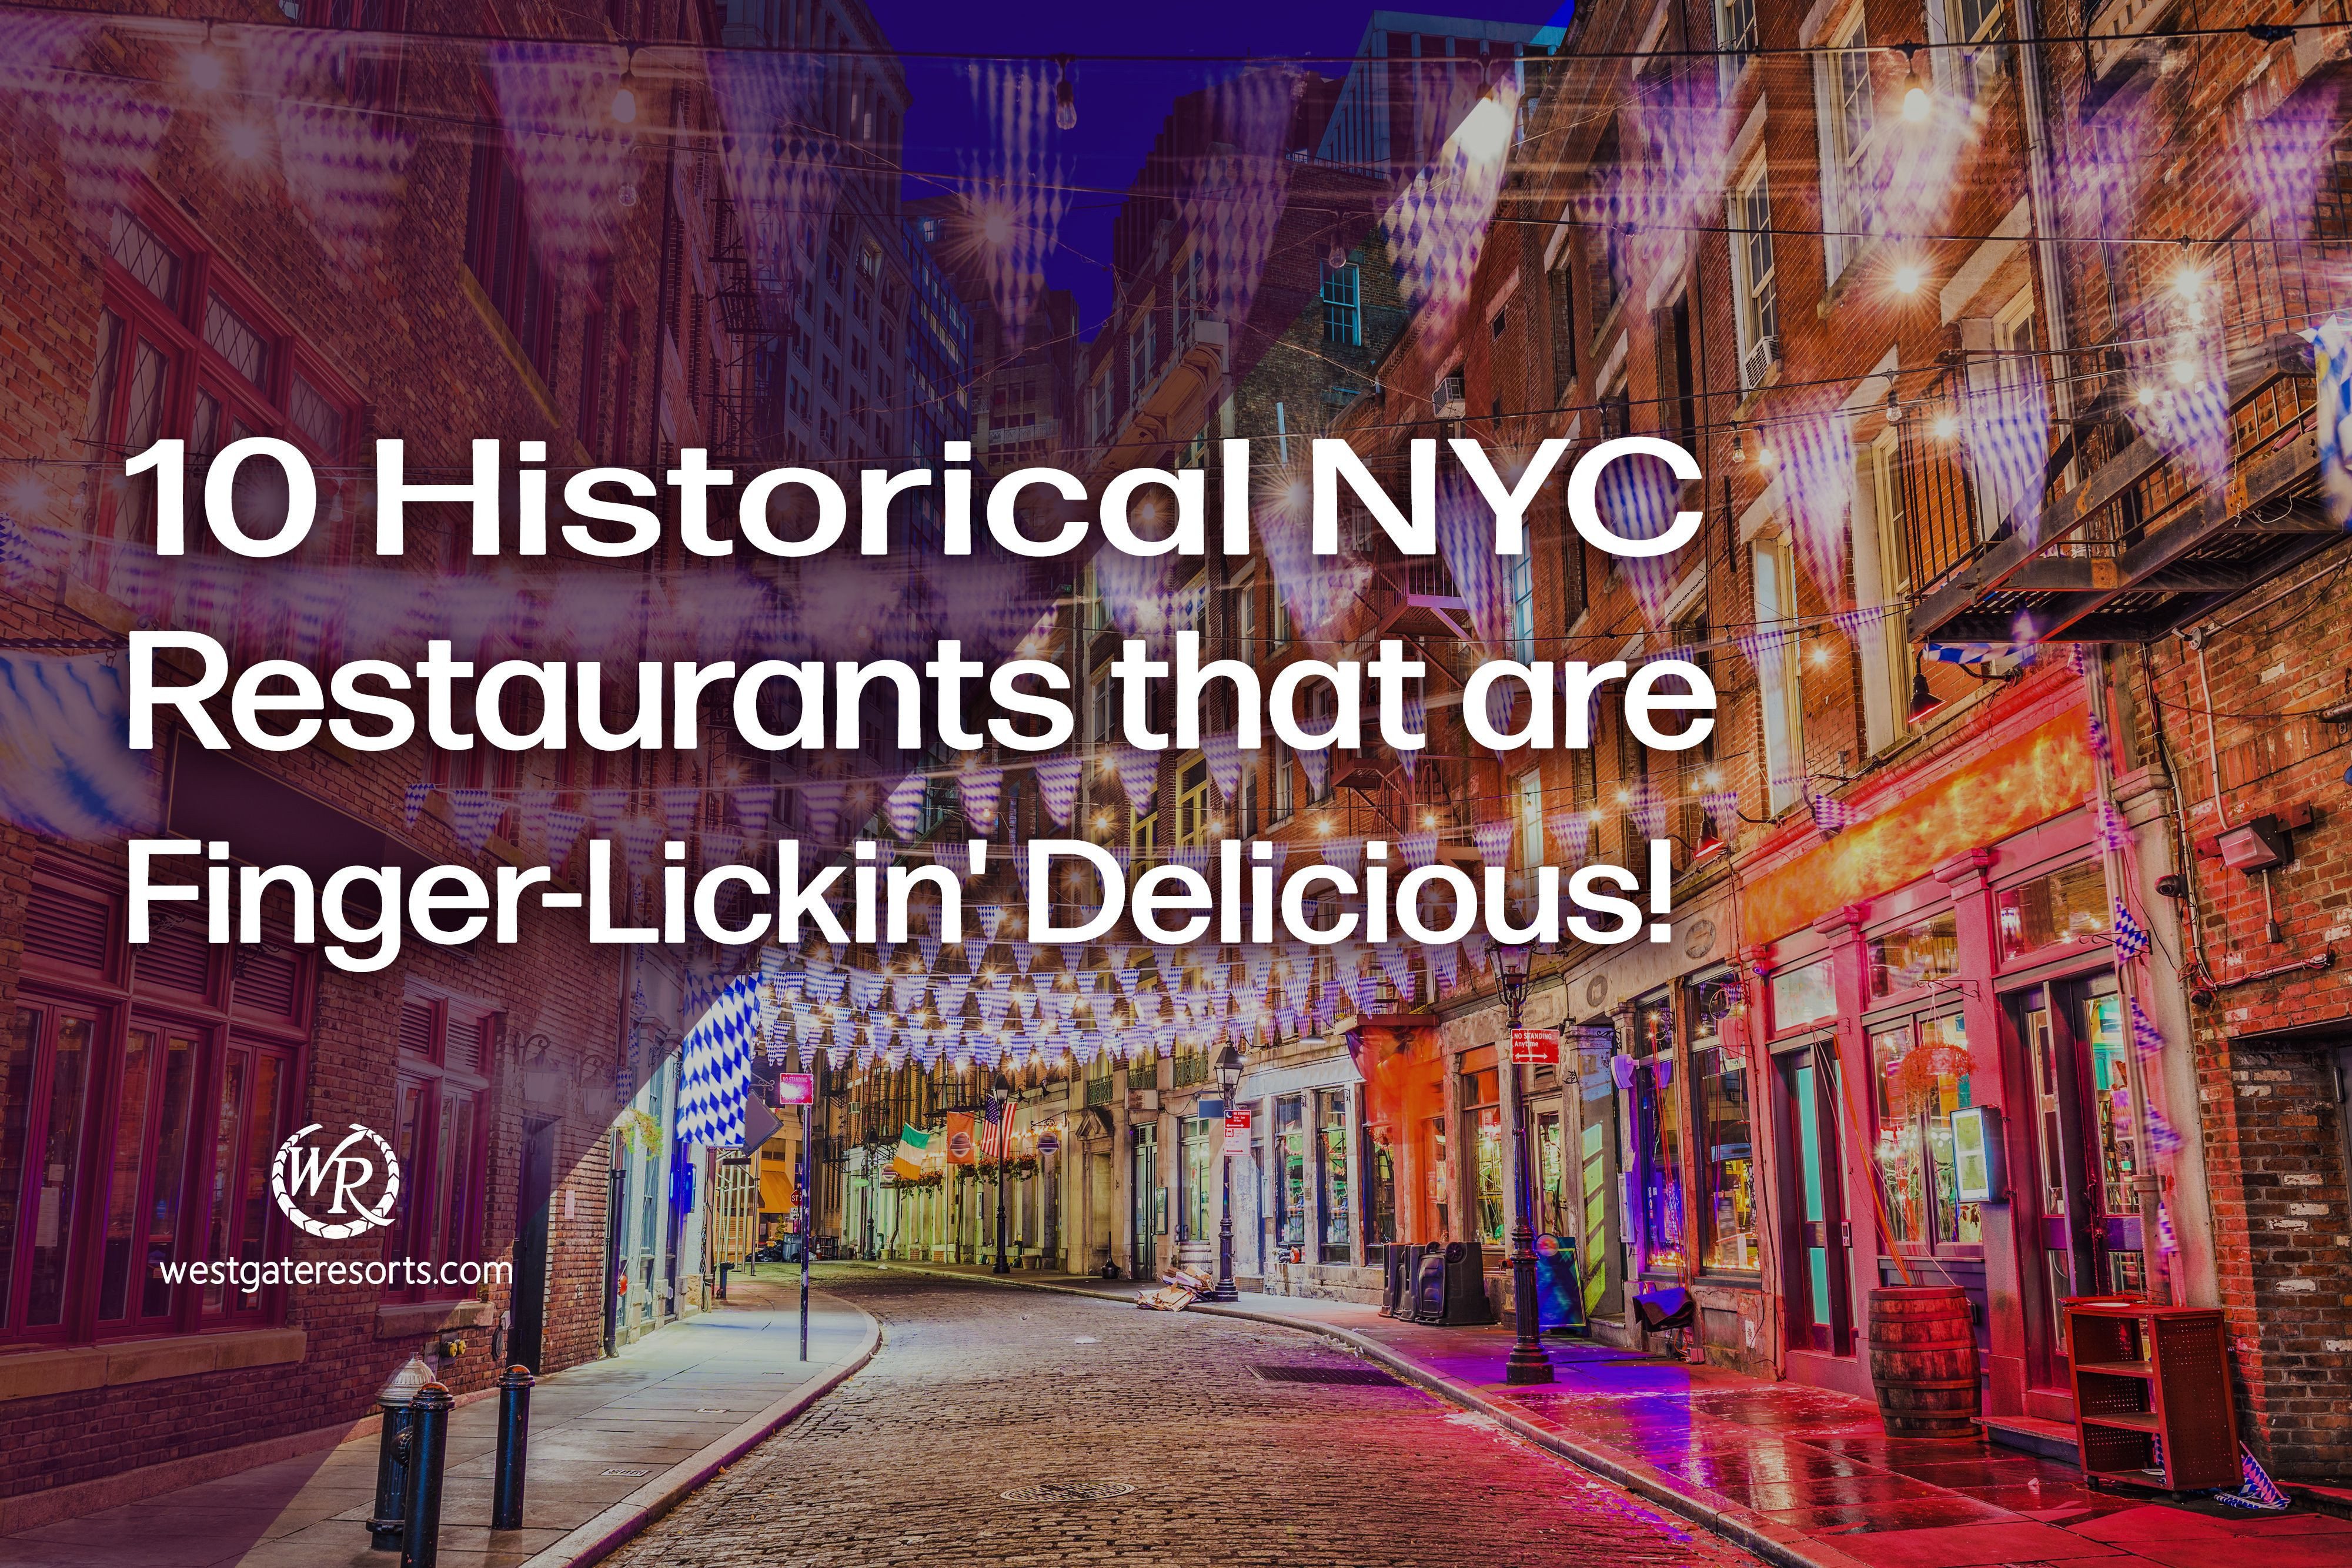 10 Historical New York City Restaurants that are Finger-Lickin' Delicious!